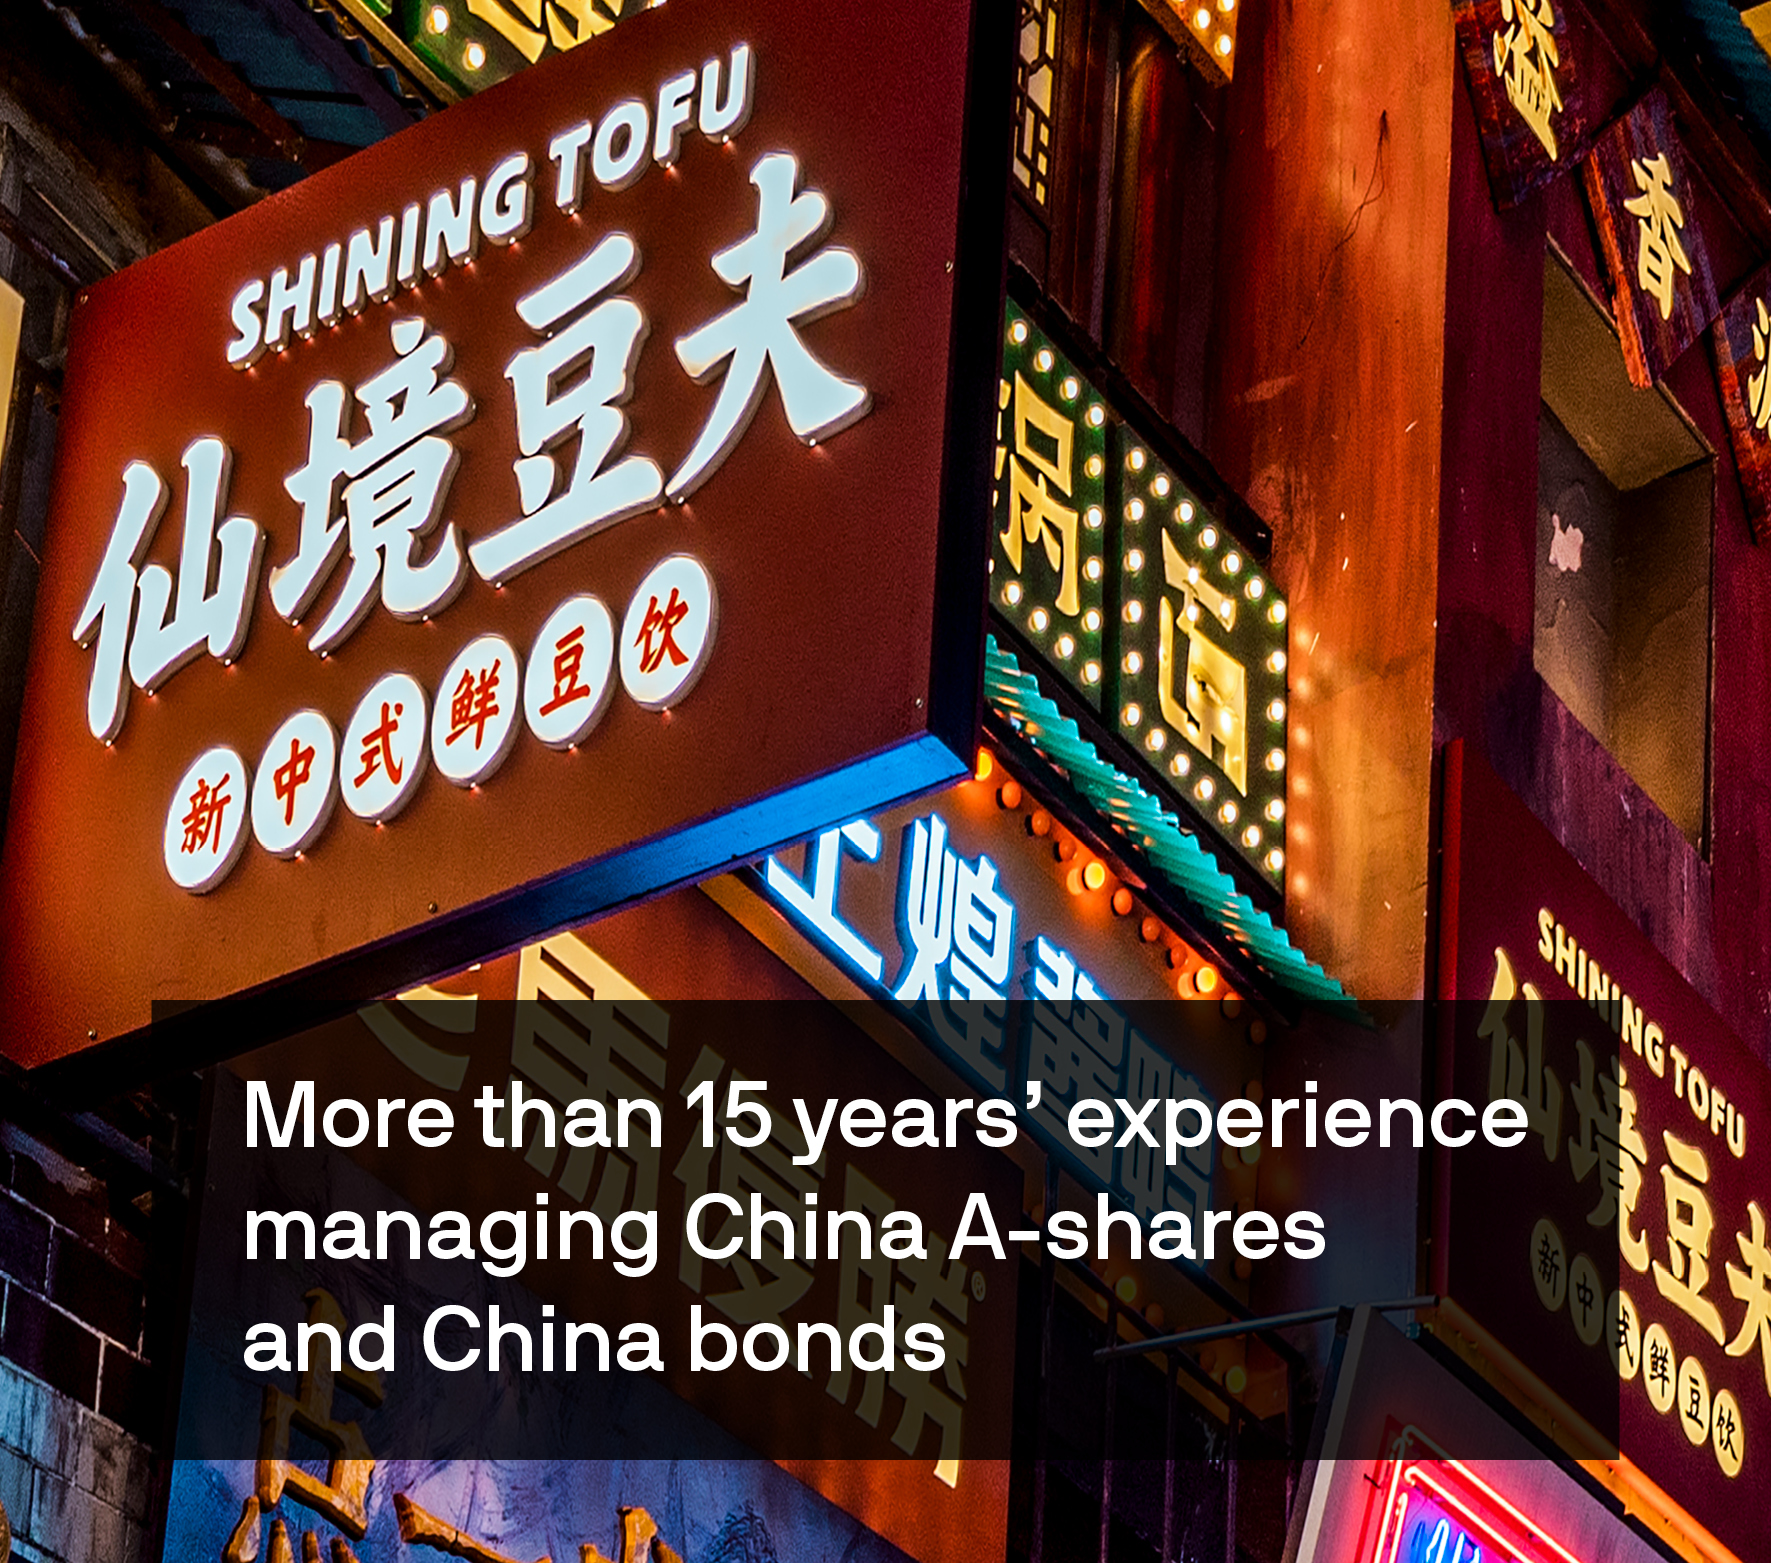 Managing China A-shares for more than a decade